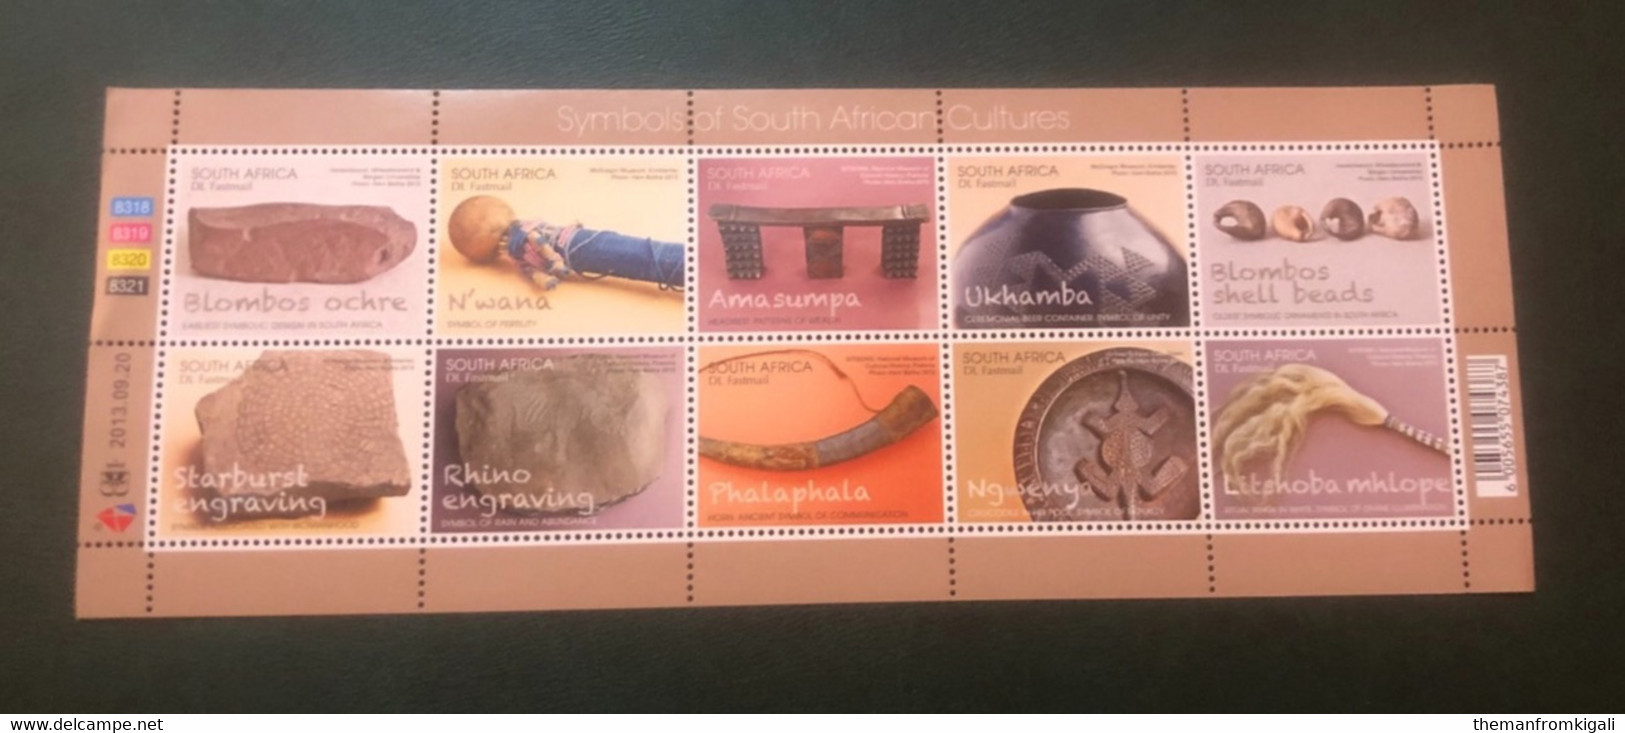 South Africa 2013 - Symbols Of South African Cultures - Unused Stamps